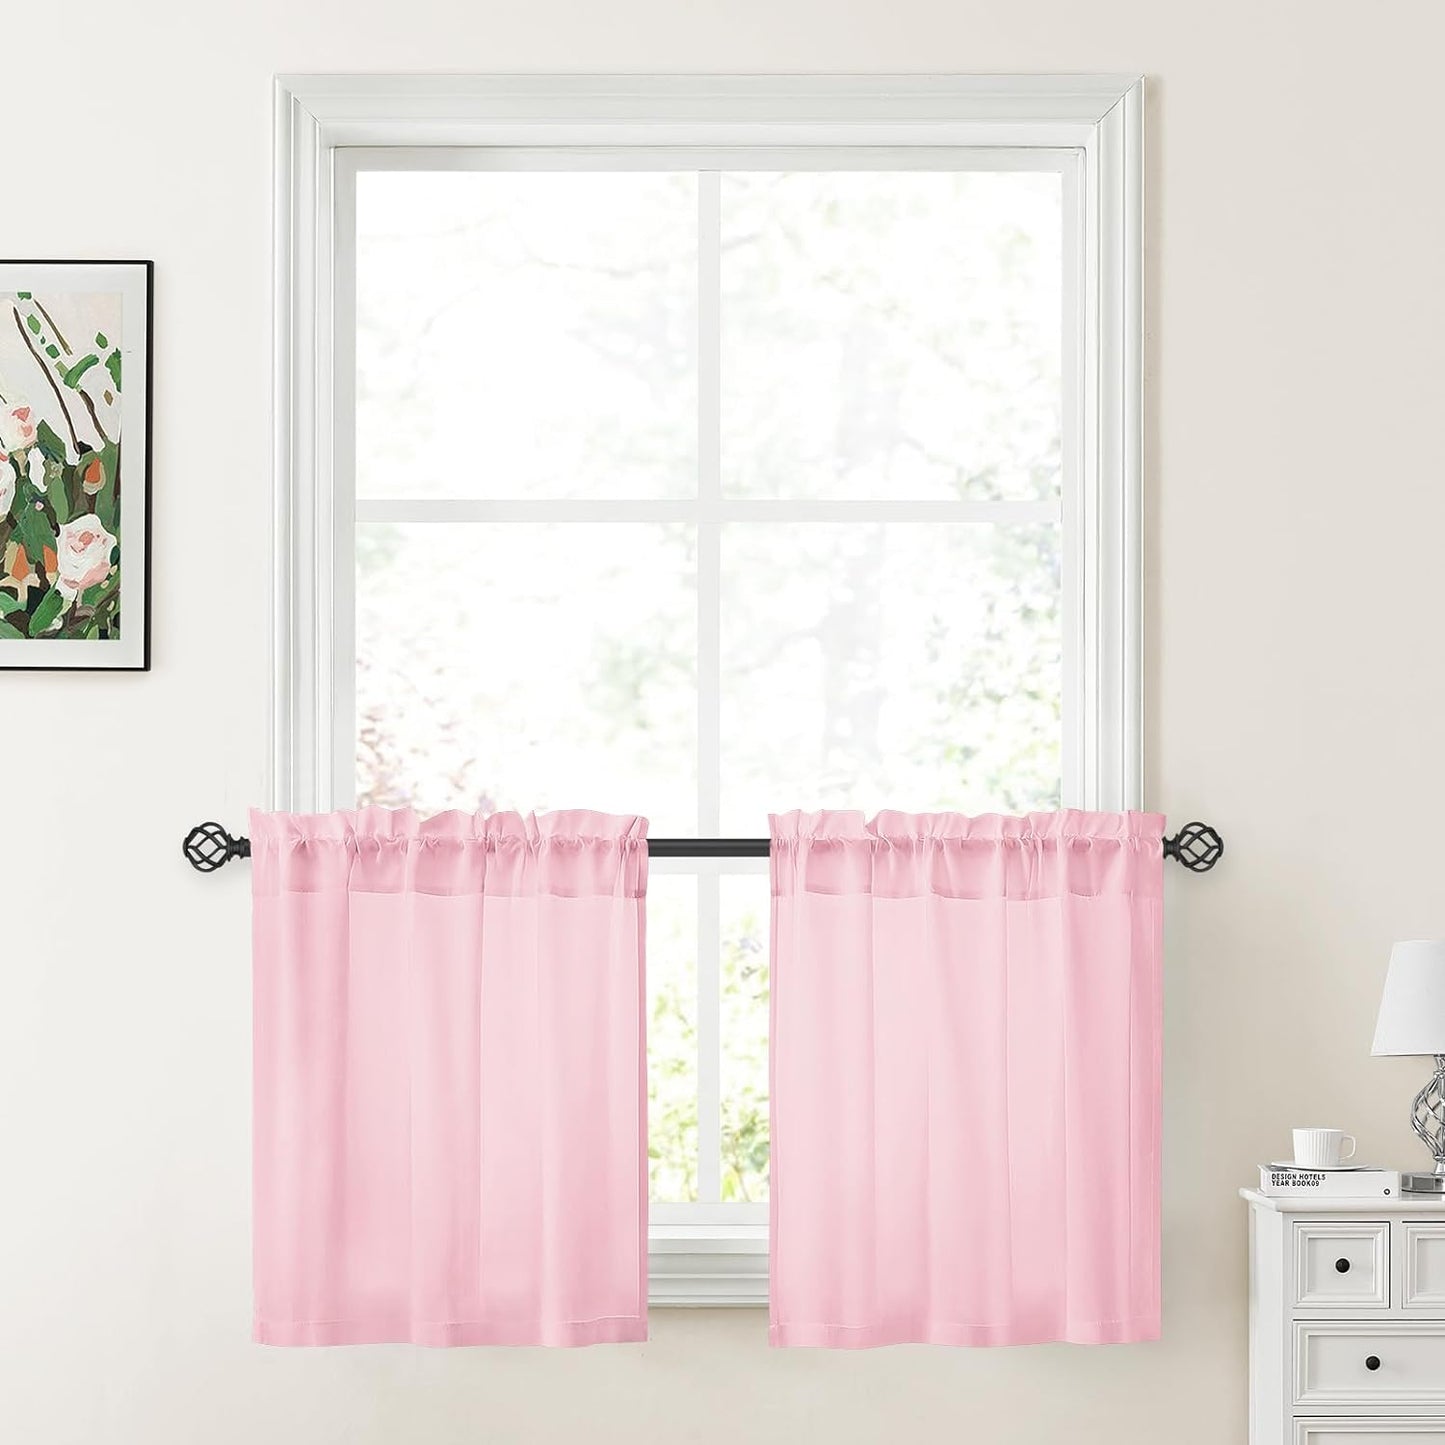 HOMEIDEAS Non-See-Through White Privacy Sheer Curtains 52 X 84 Inches Long 2 Panels Semi Sheer Curtains Light Filtering Window Curtains Drapes for Bedroom Living Room  HOMEIDEAS Light Pink W30" X L24" 